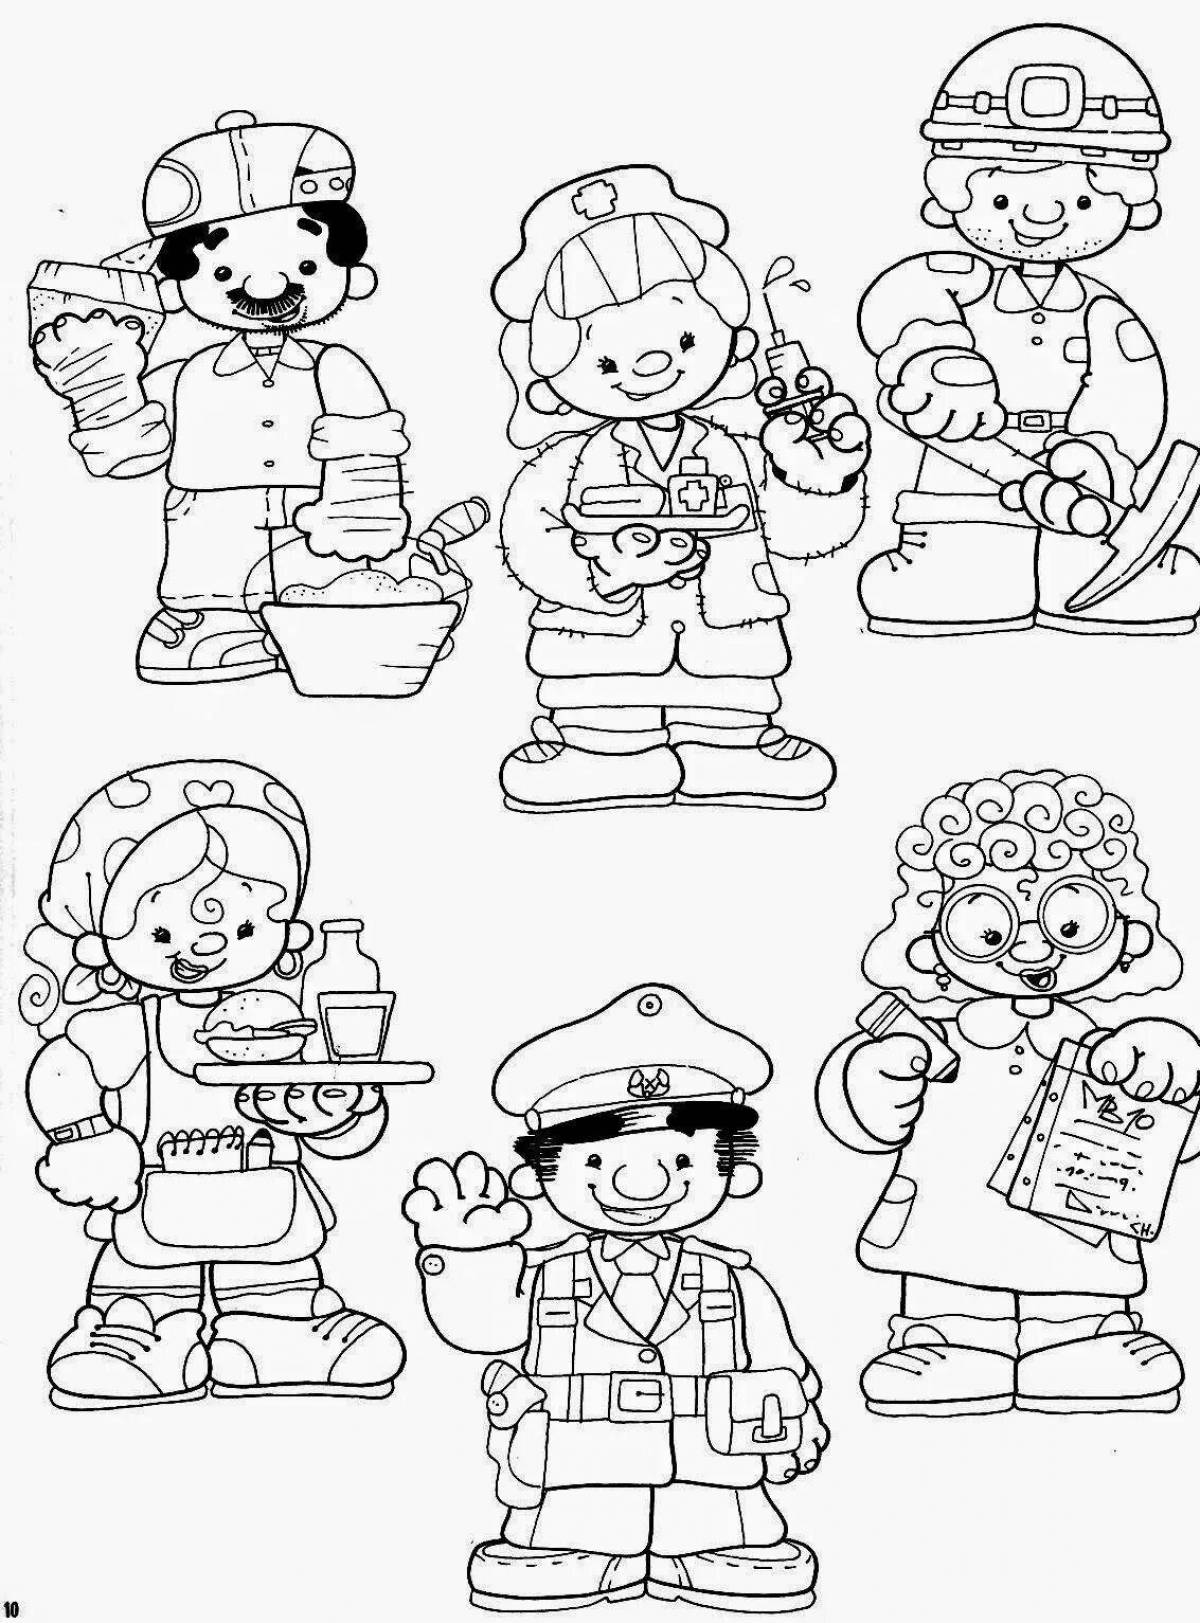 Fun job coloring pages for preschoolers